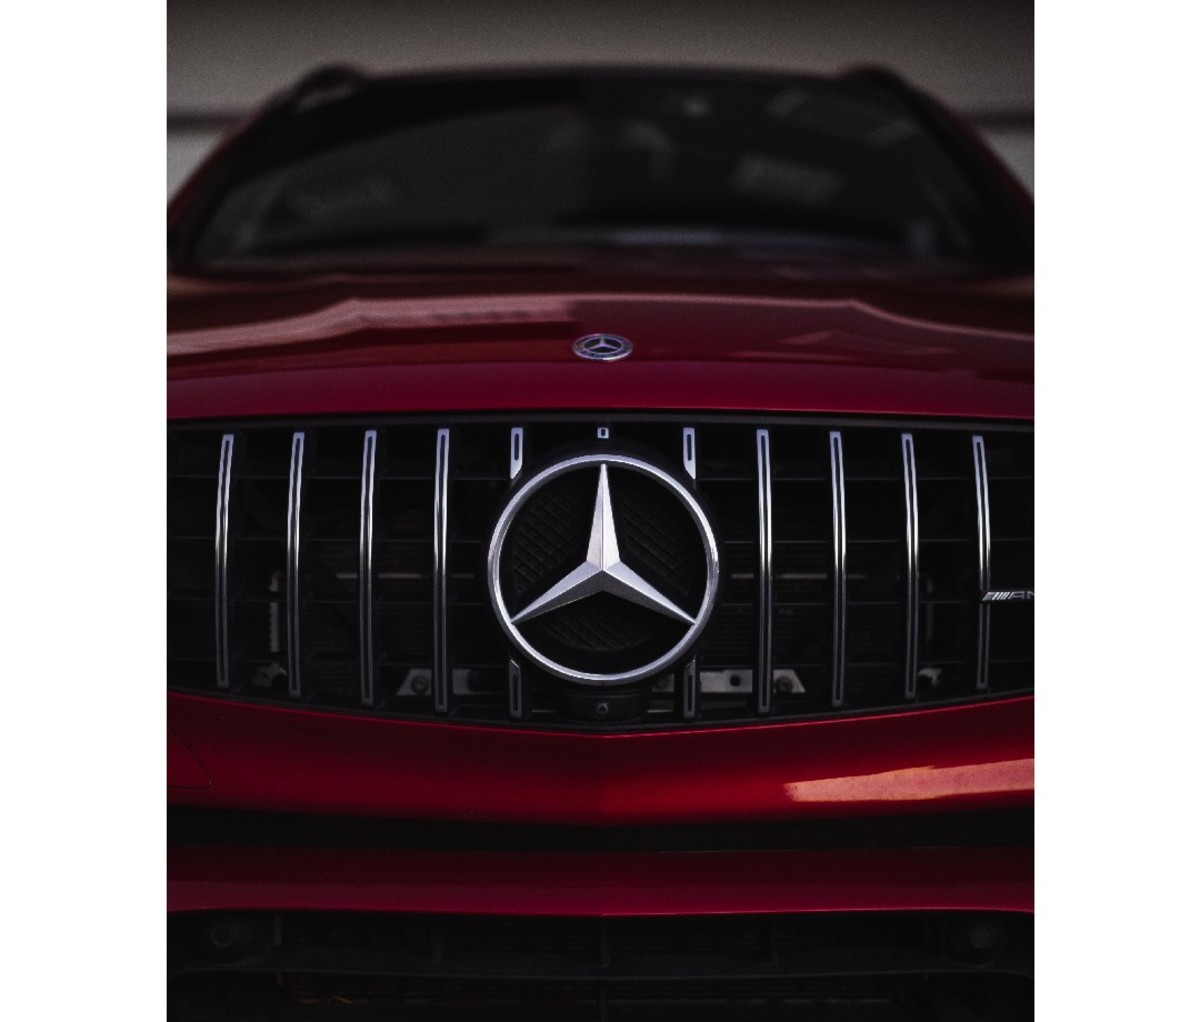 Mercedes front grill shot with a Leica M11 camera